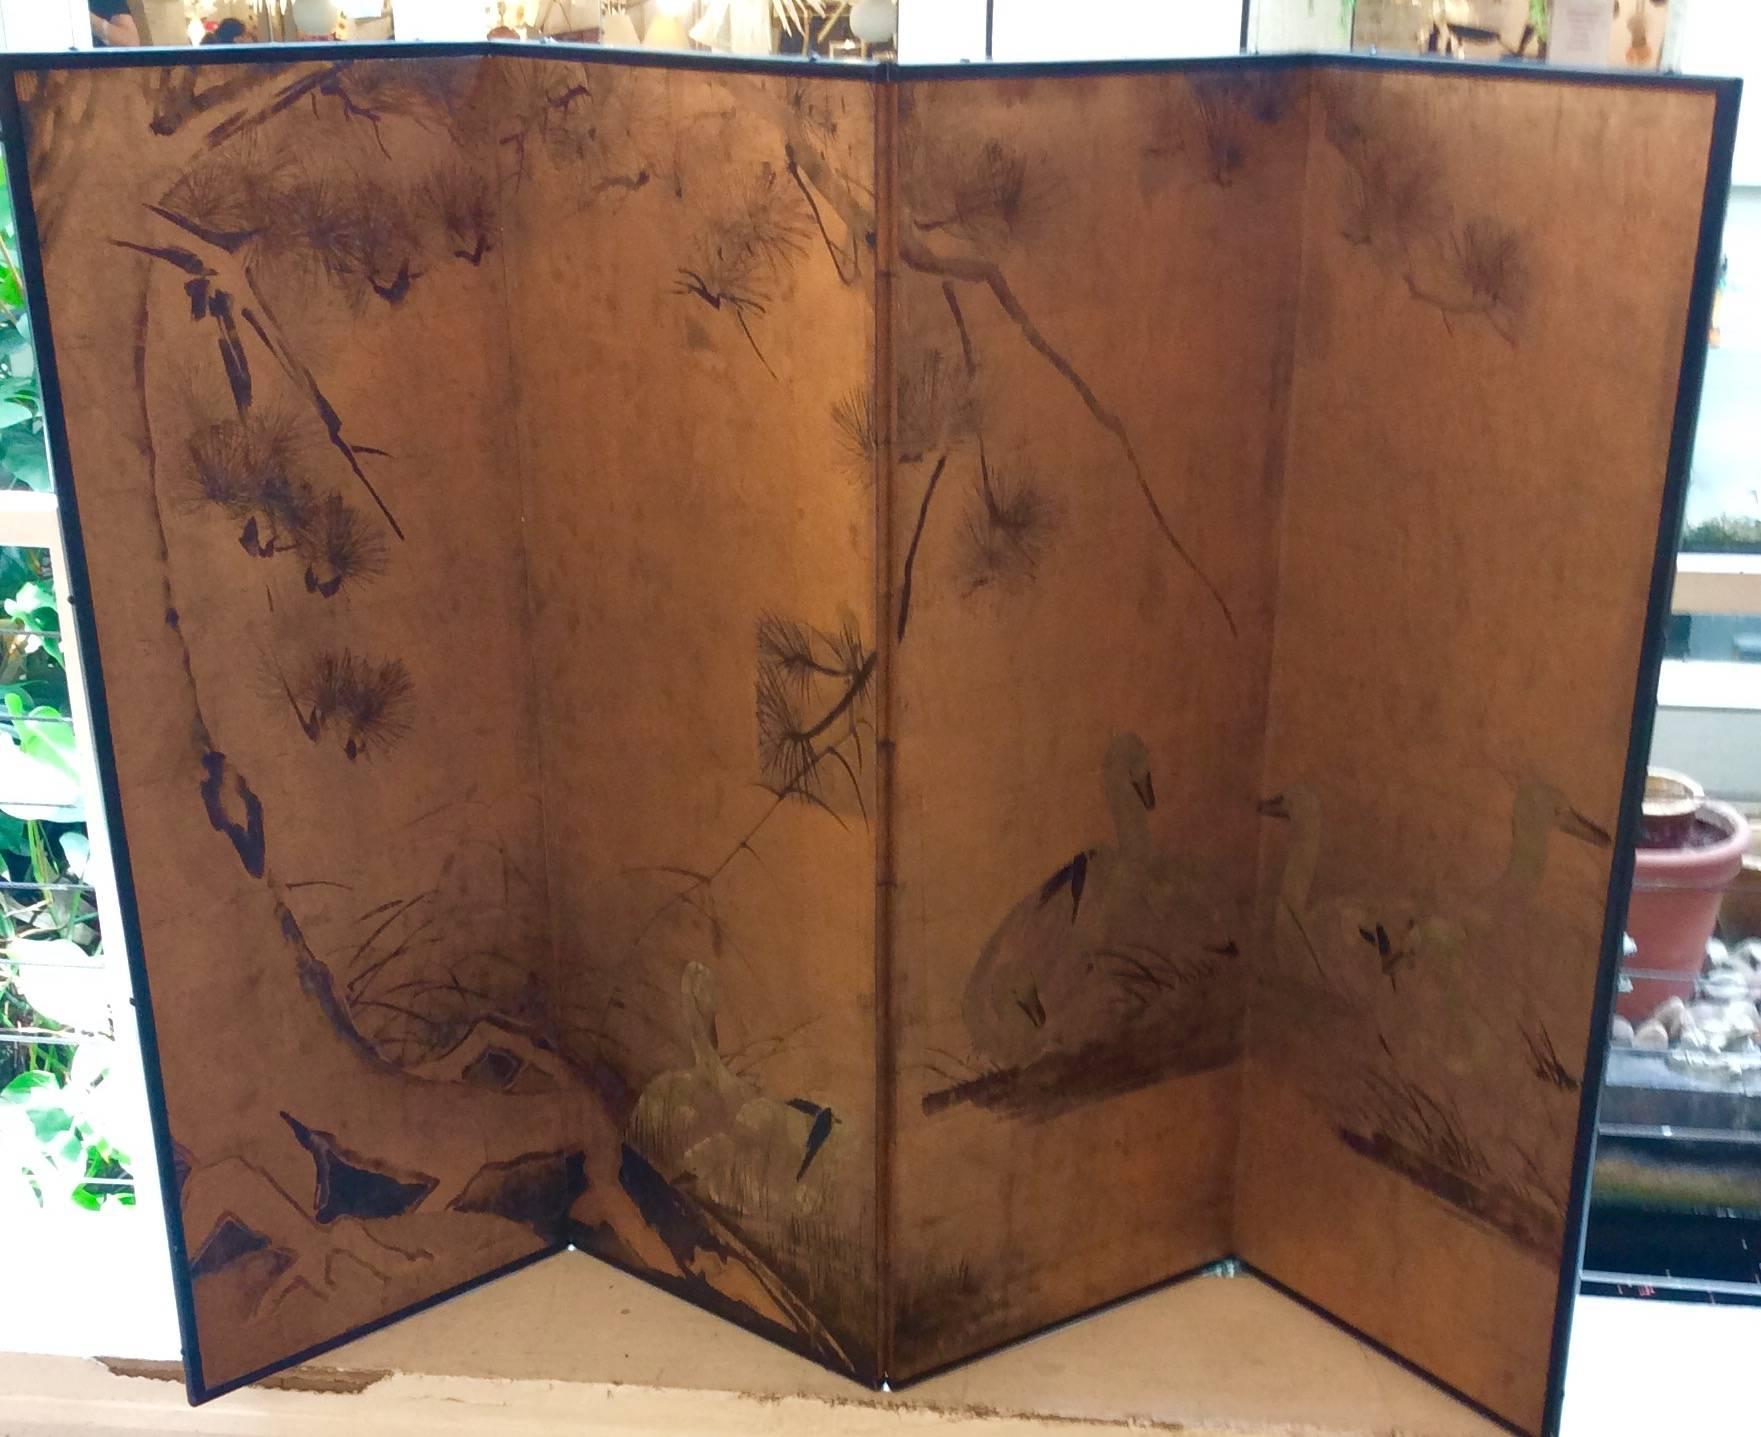 Mid 20th century hand-painted wall paper screen.
Four-panel gold leaf background with hand-painted scene.